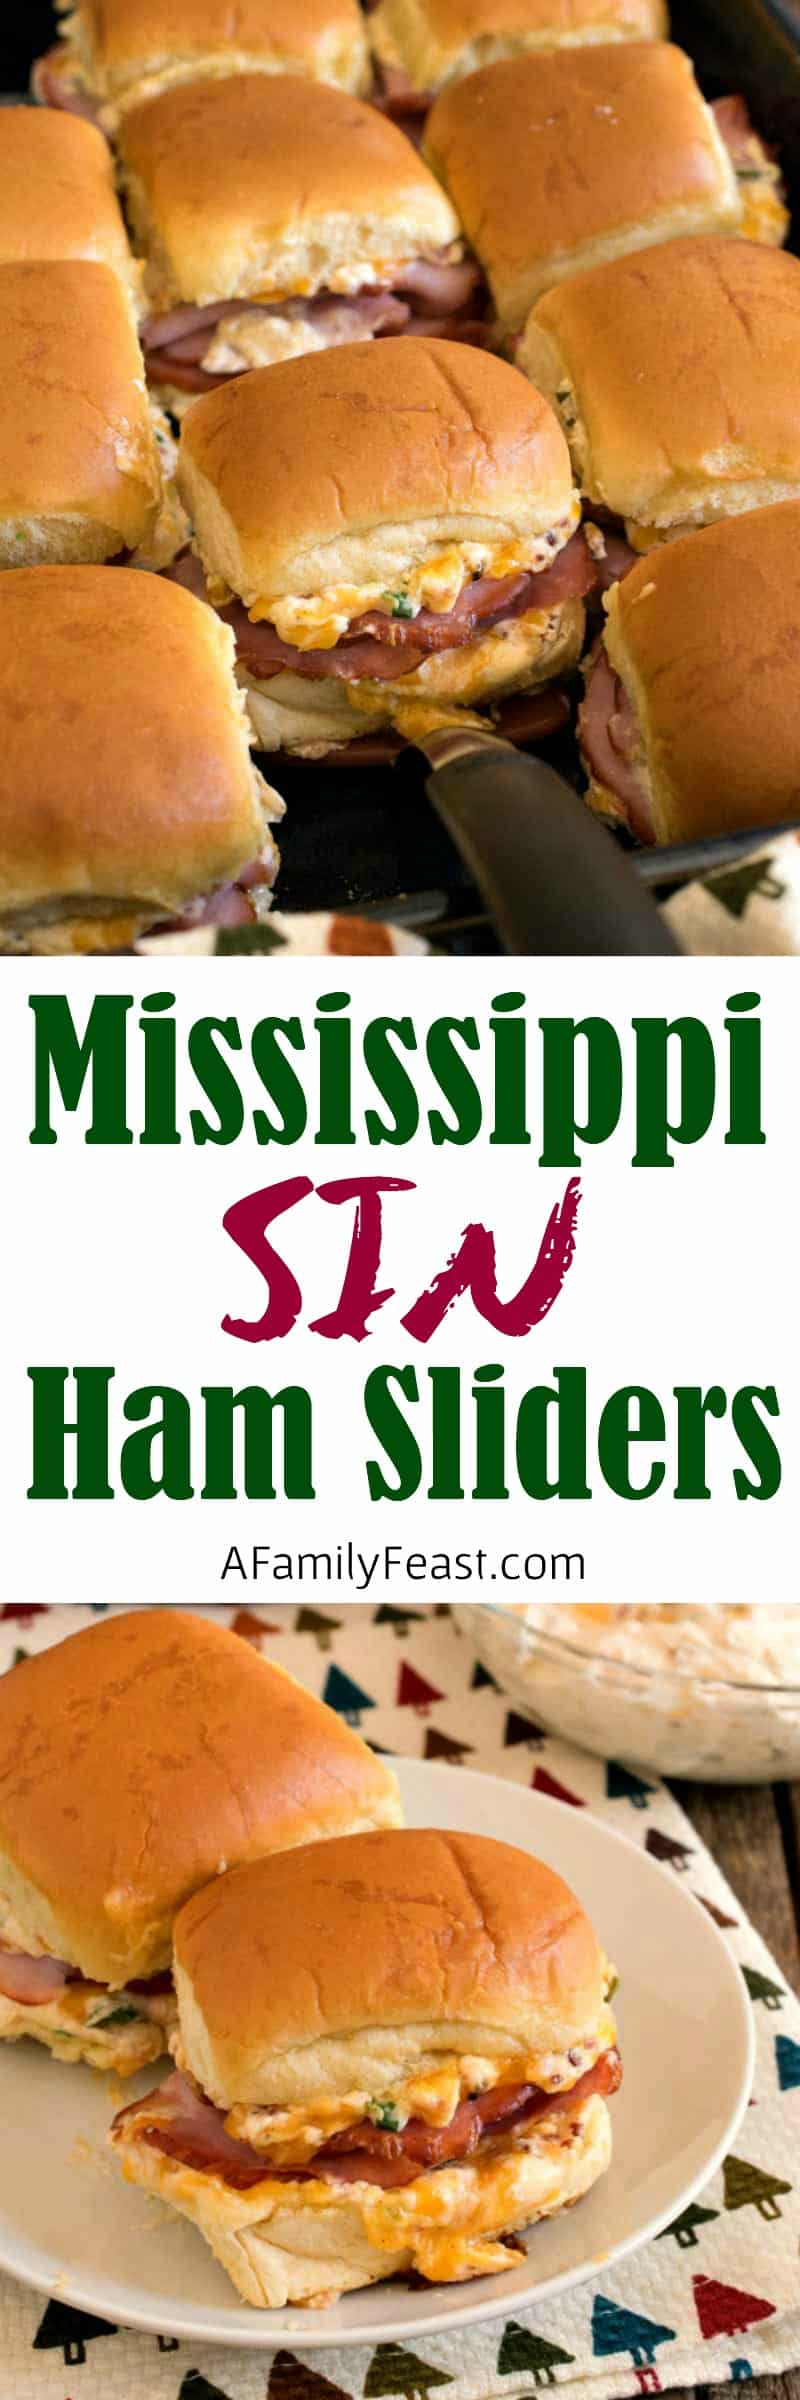 Mississippi Sin Ham Sliders - Delicious ham sliders with a zesty cheesy topping - just like the Mississippi Sin Dip!